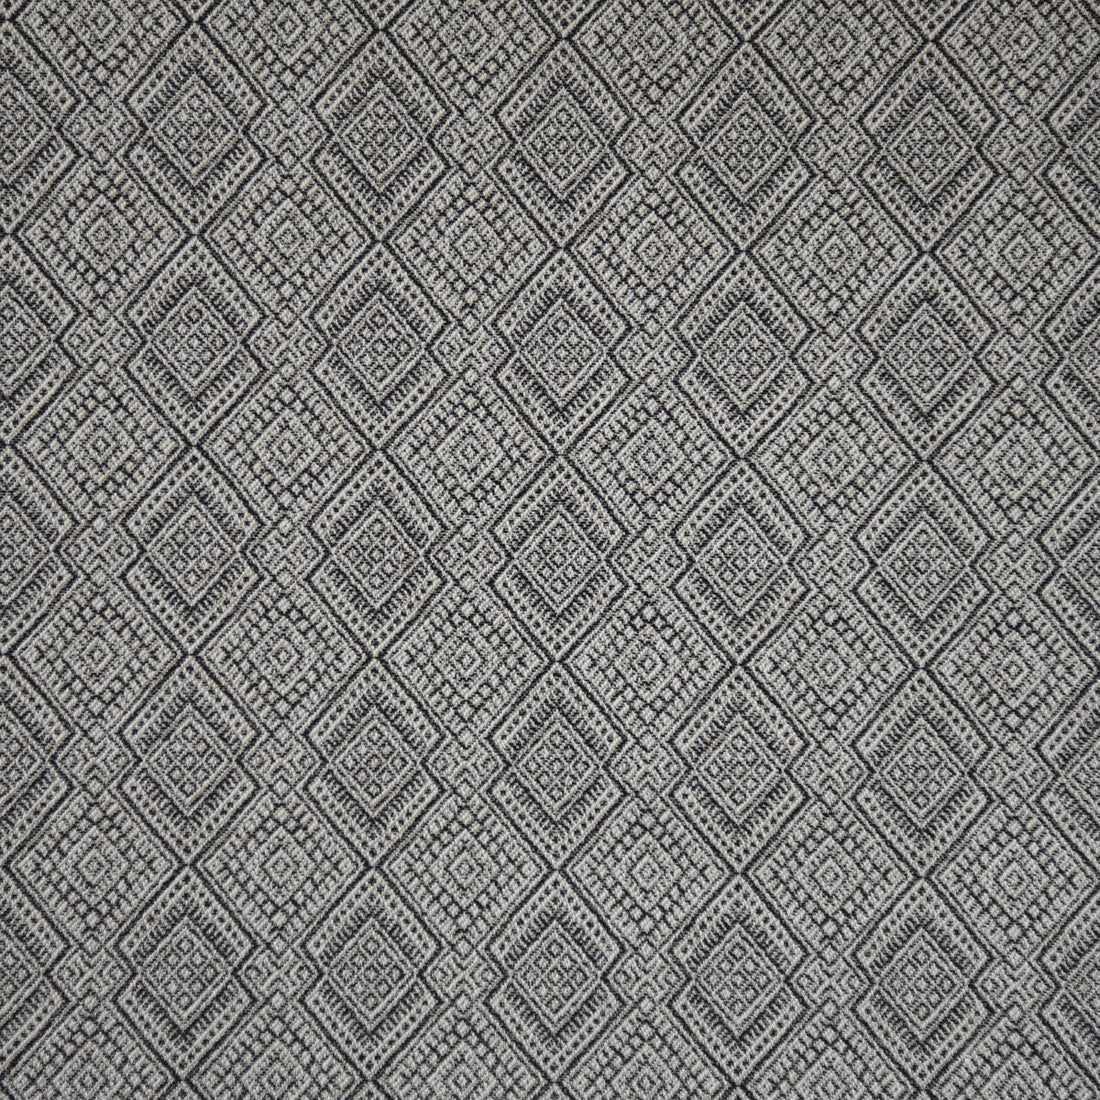 Iguazu fabric in noir color - pattern 35551.816.0 - by Kravet Couture in the Modern Colors-Sojourn Collection collection